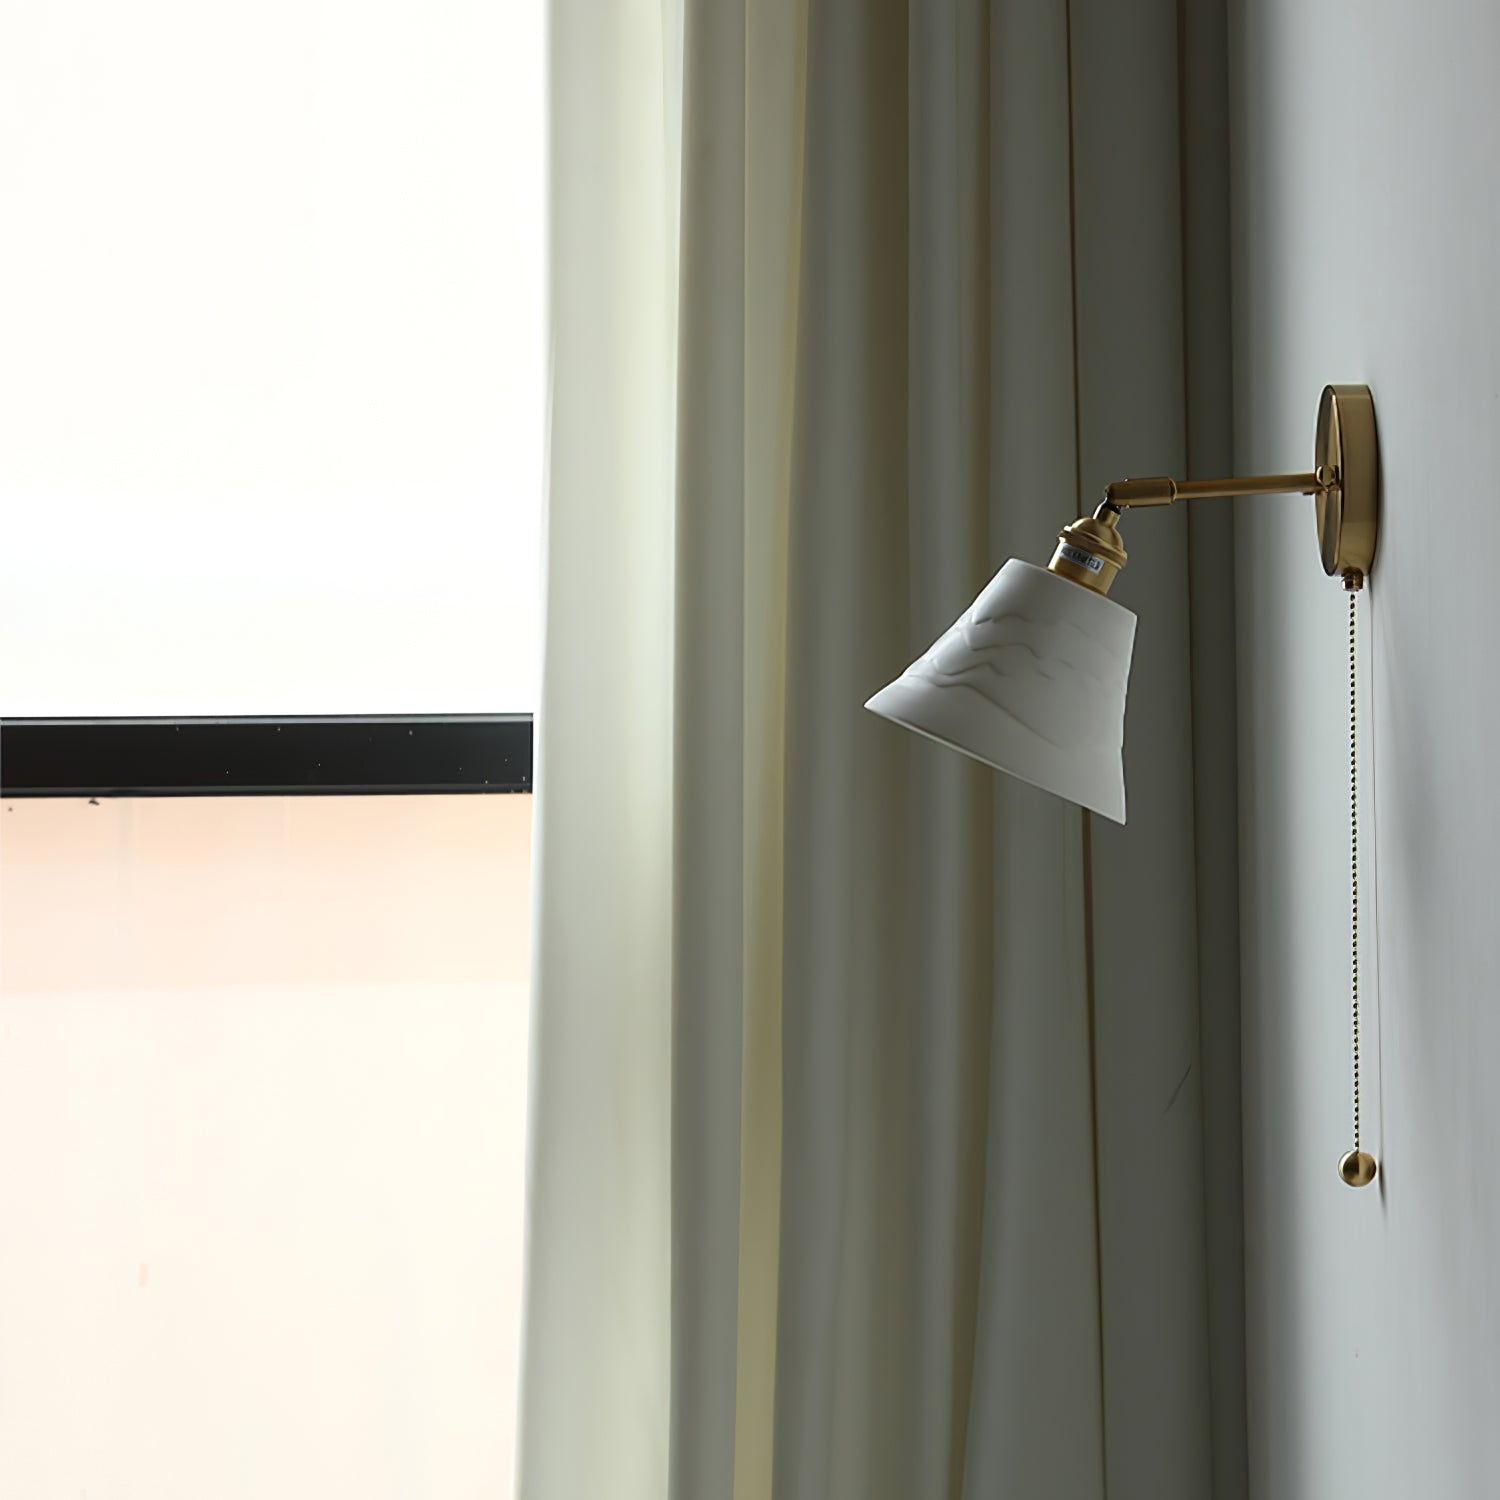 Conical Ceramic Wall Light